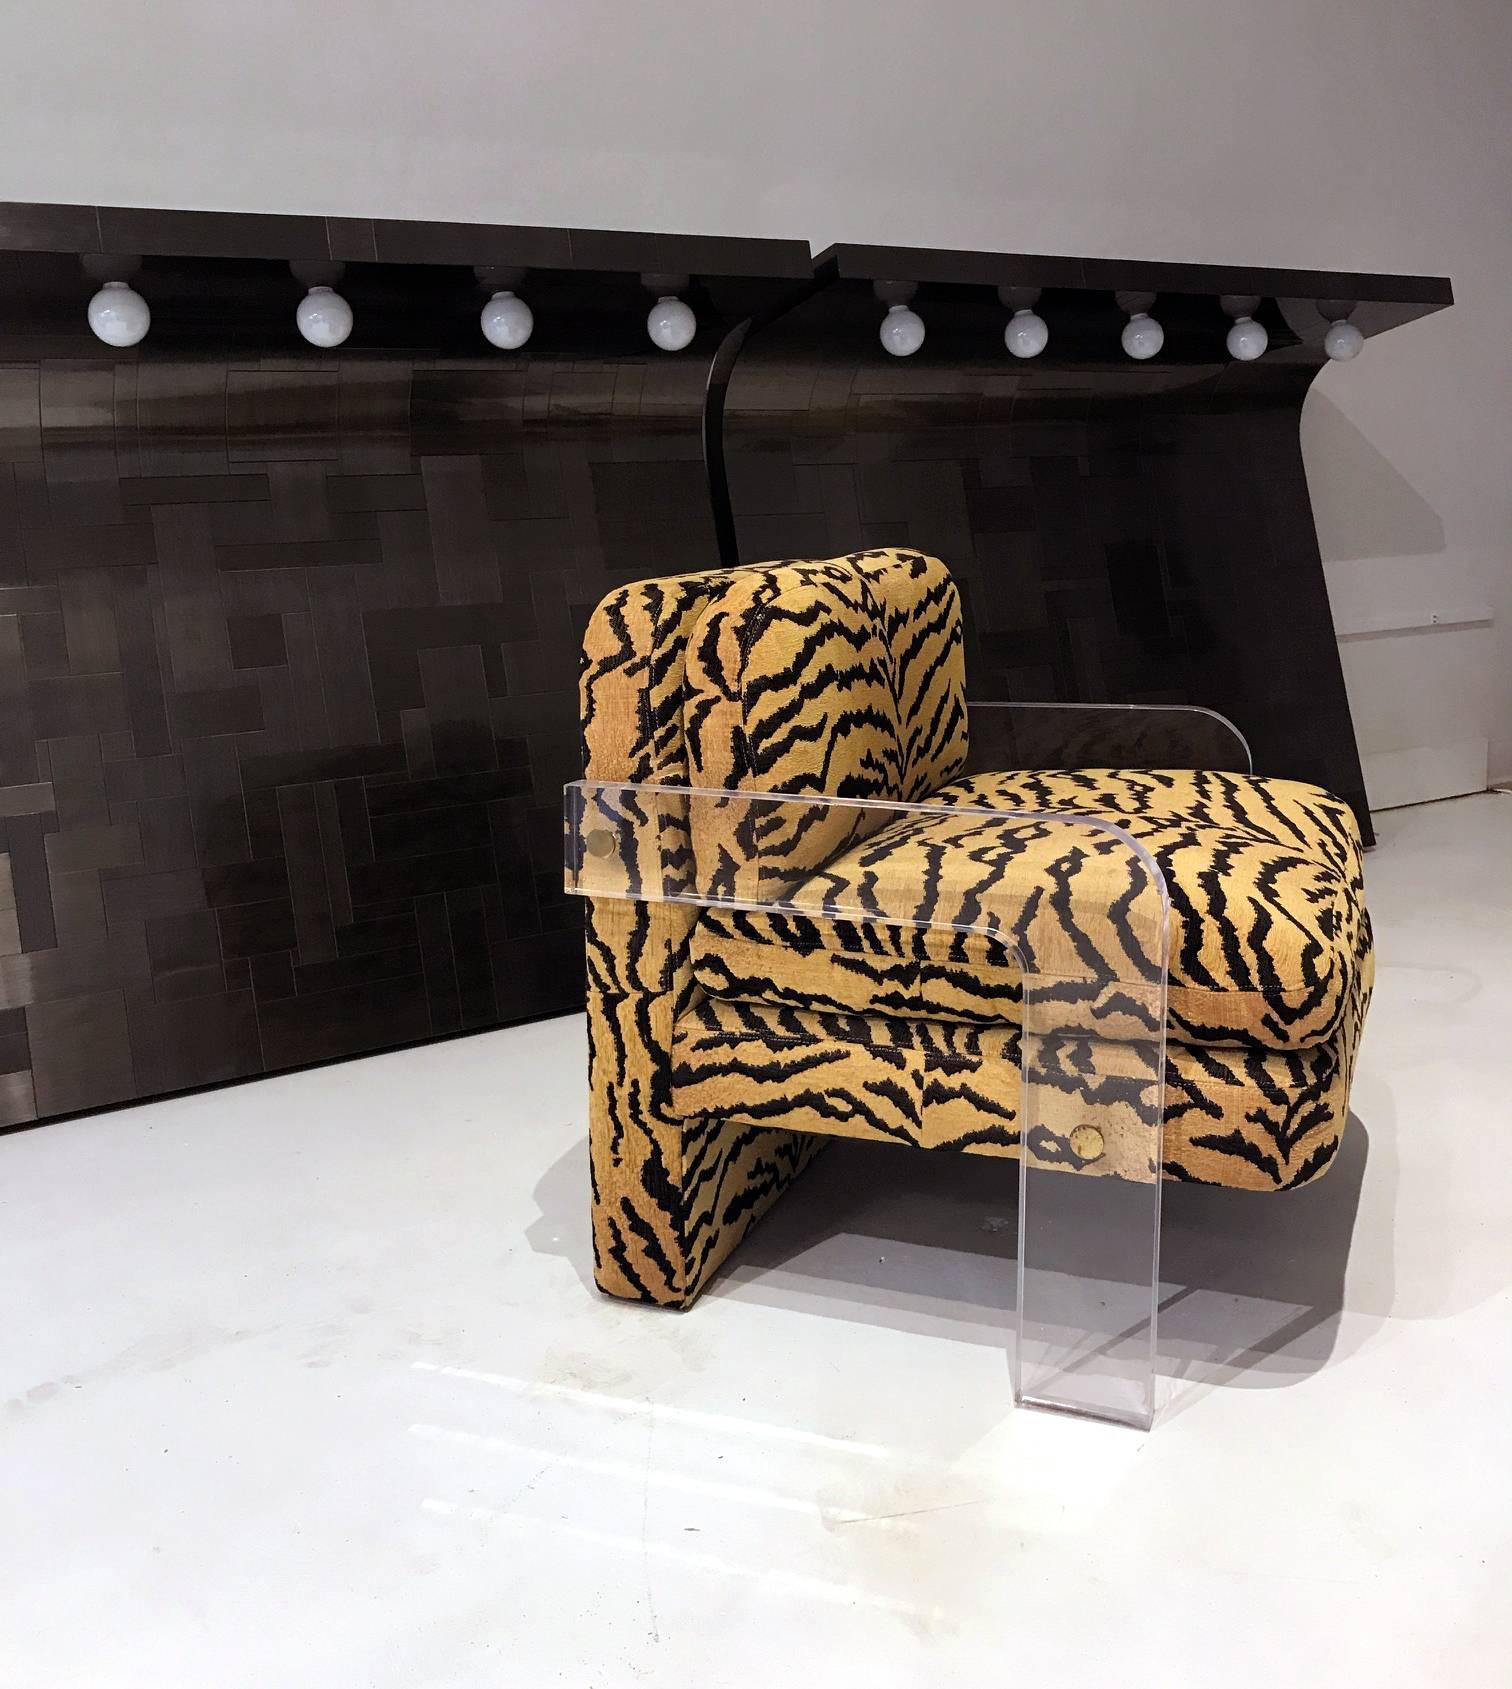 A fantastic cubist lounge chair constructed in Lucite with exposed brass hardware, designed by Vladimir Kagan, circa 1970s. Modern and striking with contrasting tiger skin print upholstery that is likely original from the production.
 